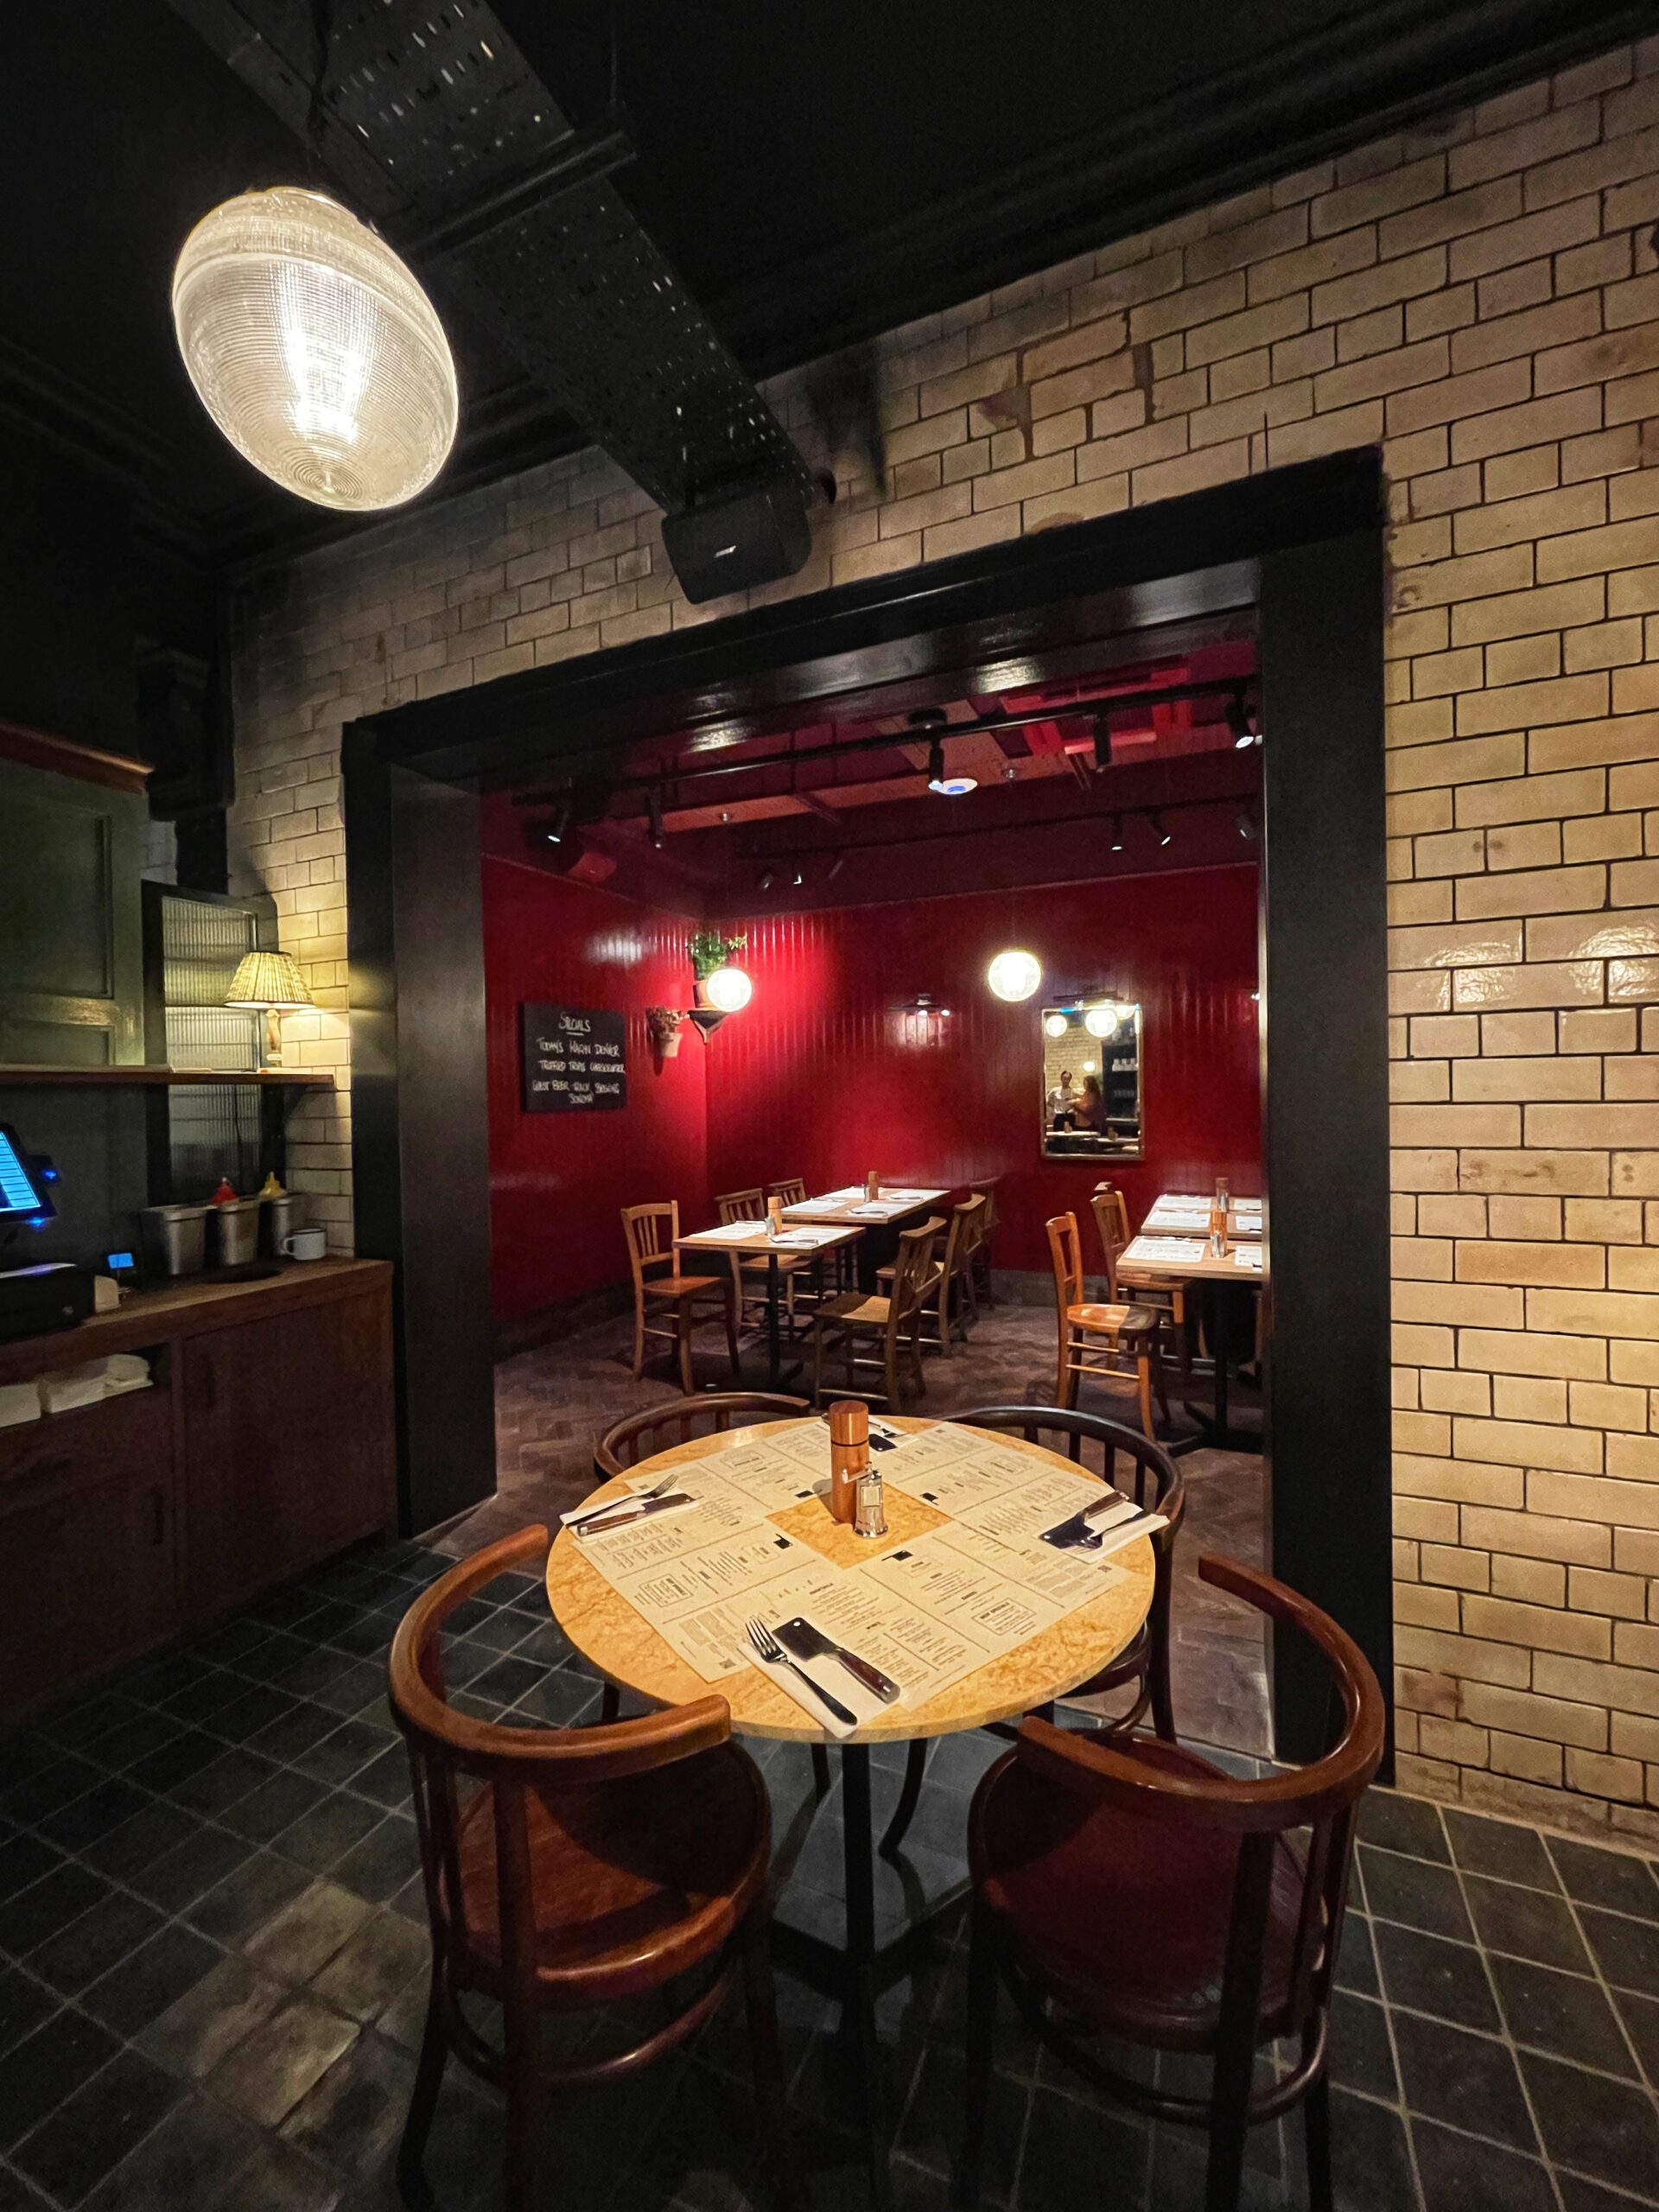 The basement dining room at Flat Iron Manchester